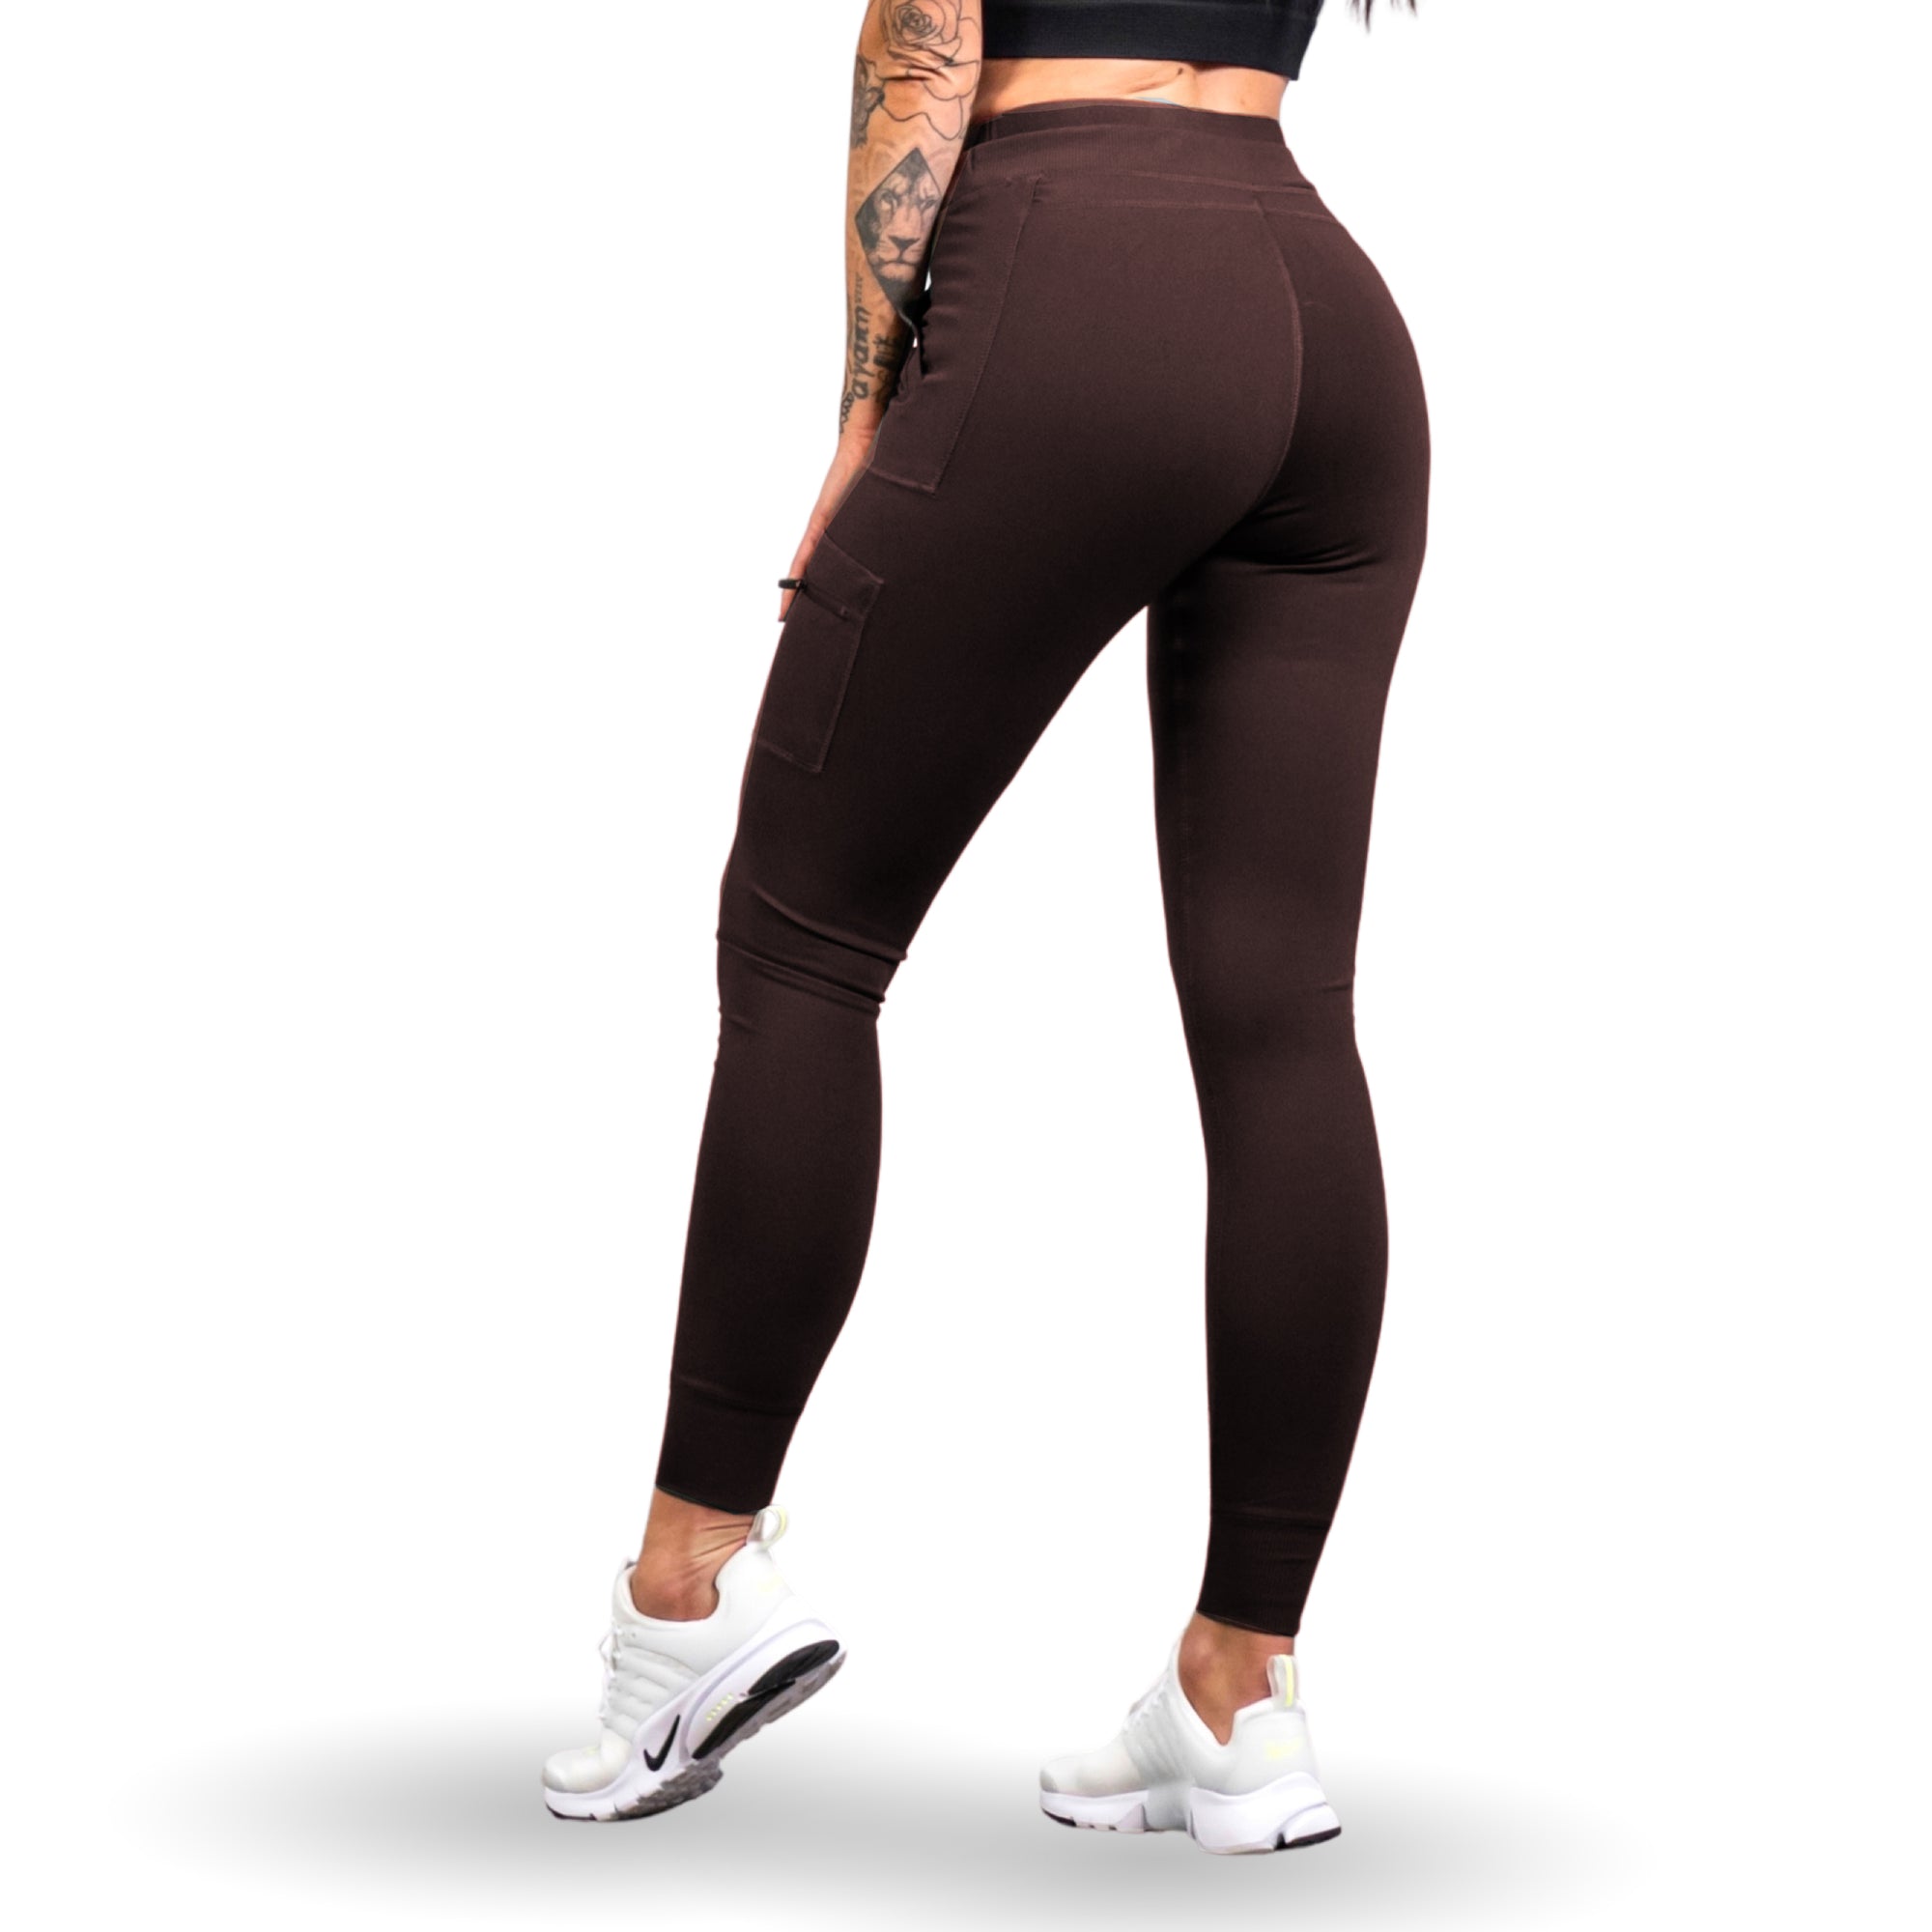 Hibiscus Cargo Workout Leggings w/ Side-Zippered Pockets – SportPort Active